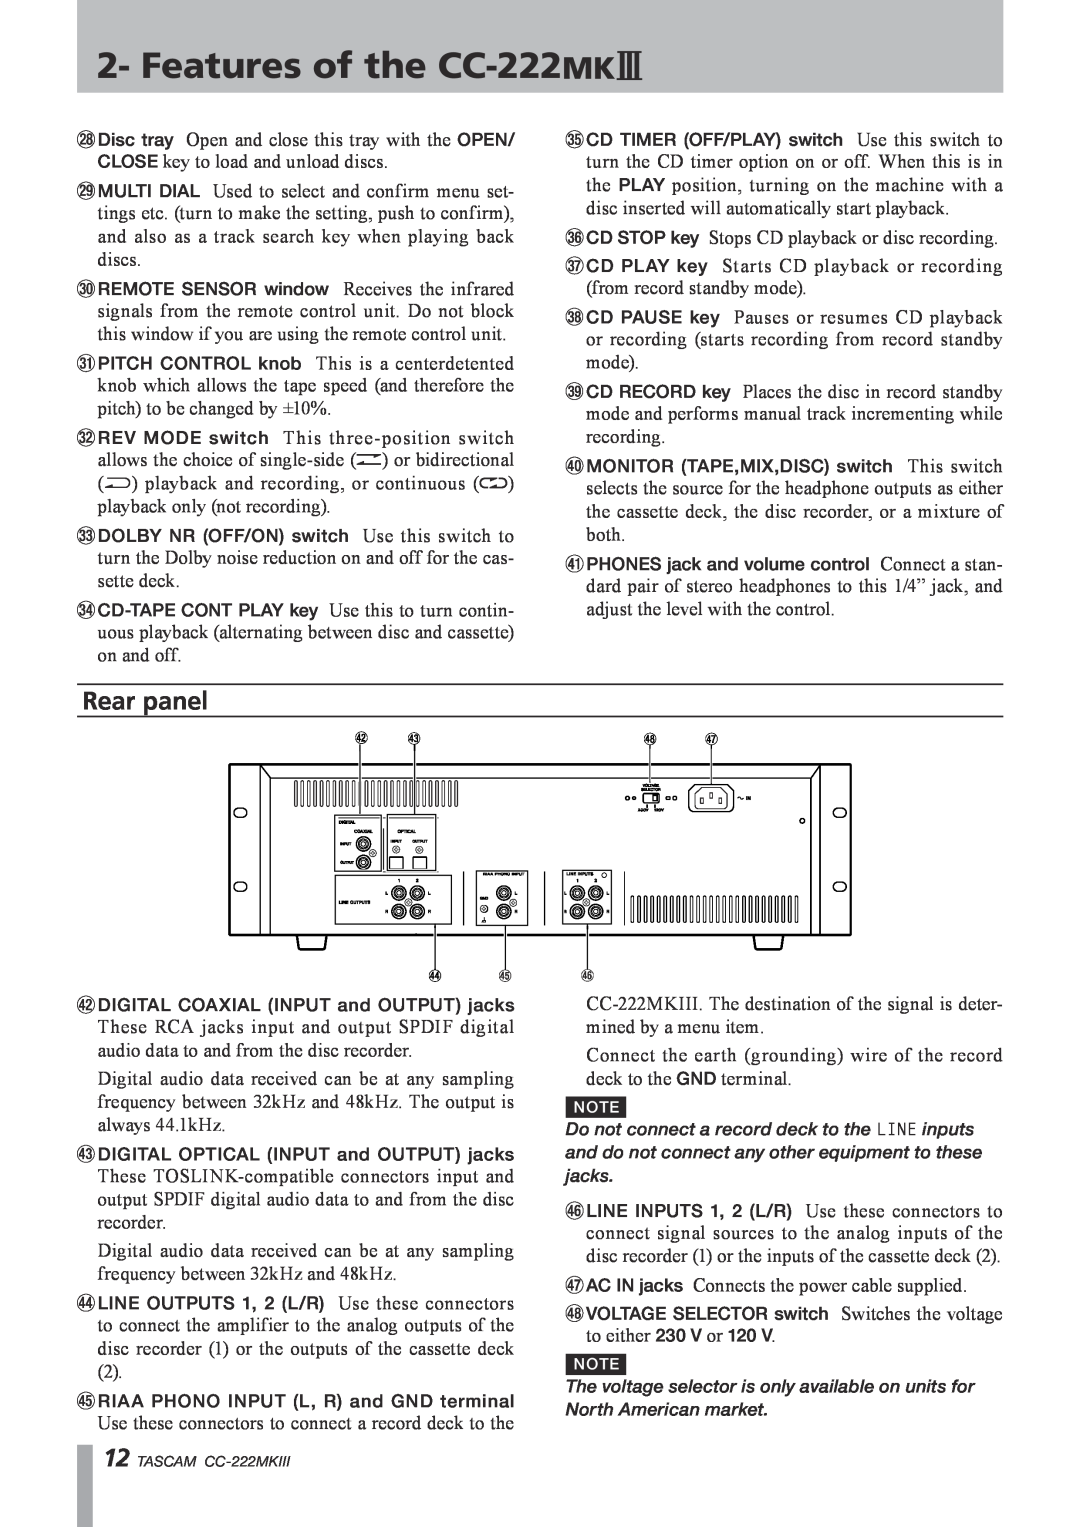 Tascam owner manual Rear panel, Features of the CC-222MK$ 